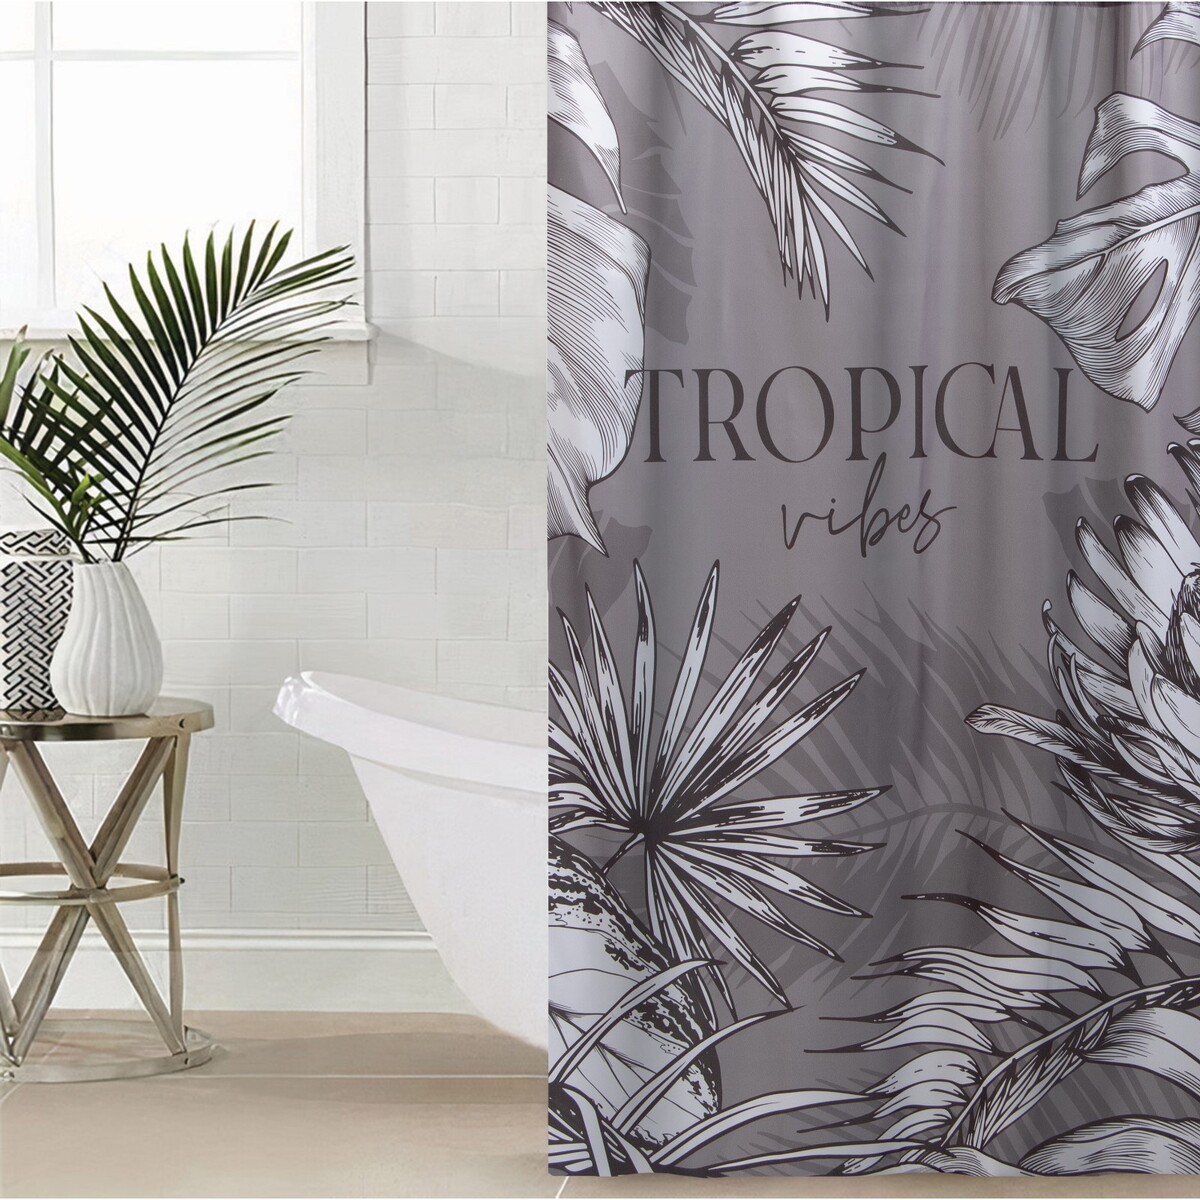     tropical vibes 145  180 , 